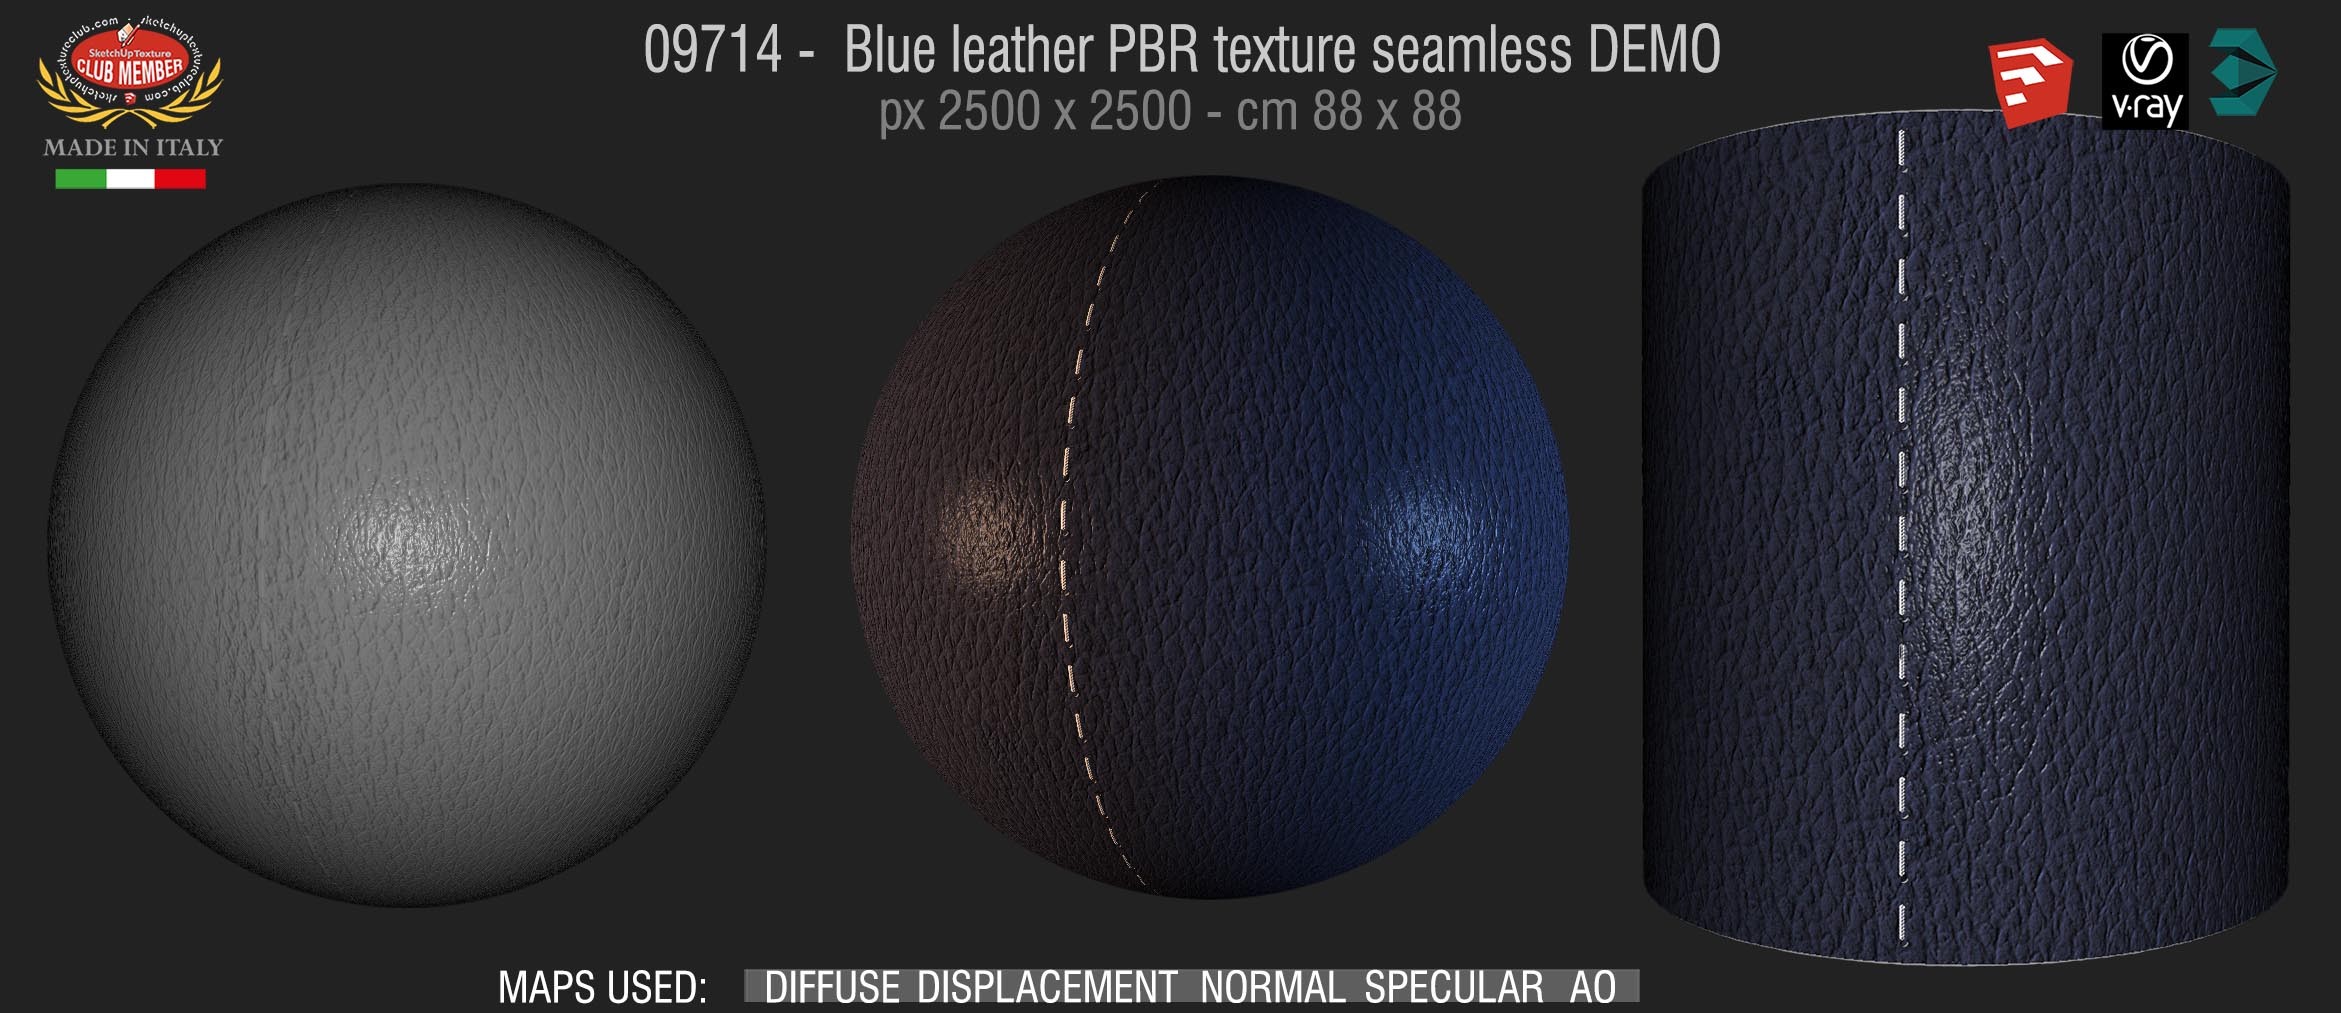 09714 Blue leather PBR texture seamless DEMO